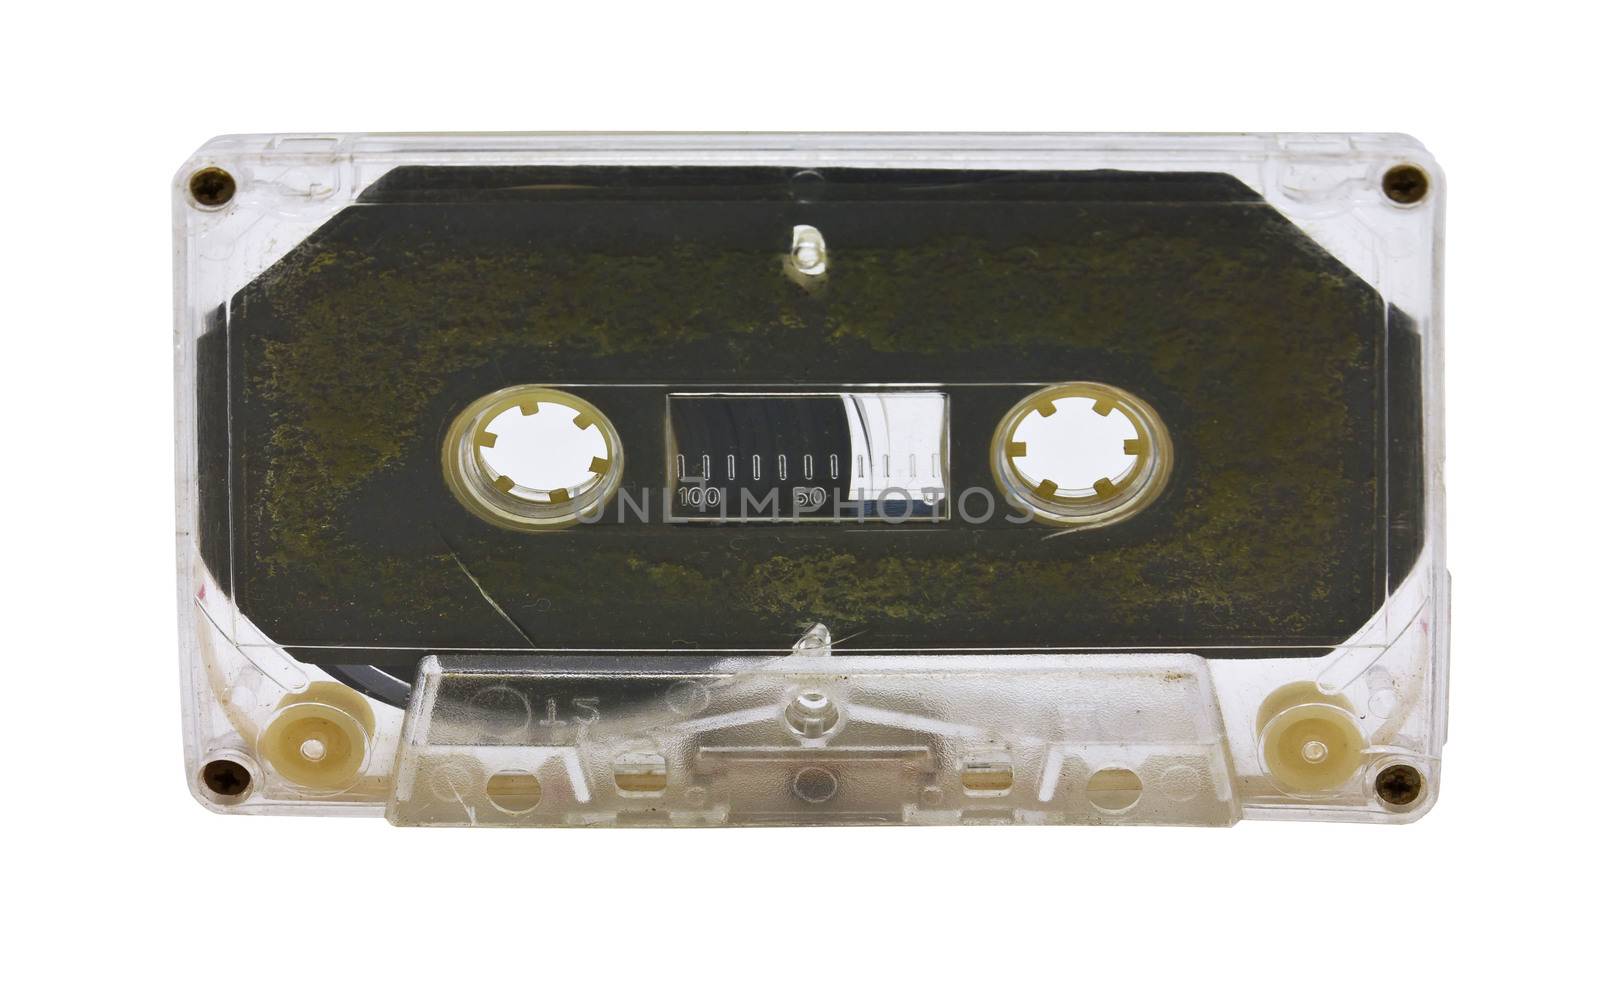 The recorded sound is only available on tape only